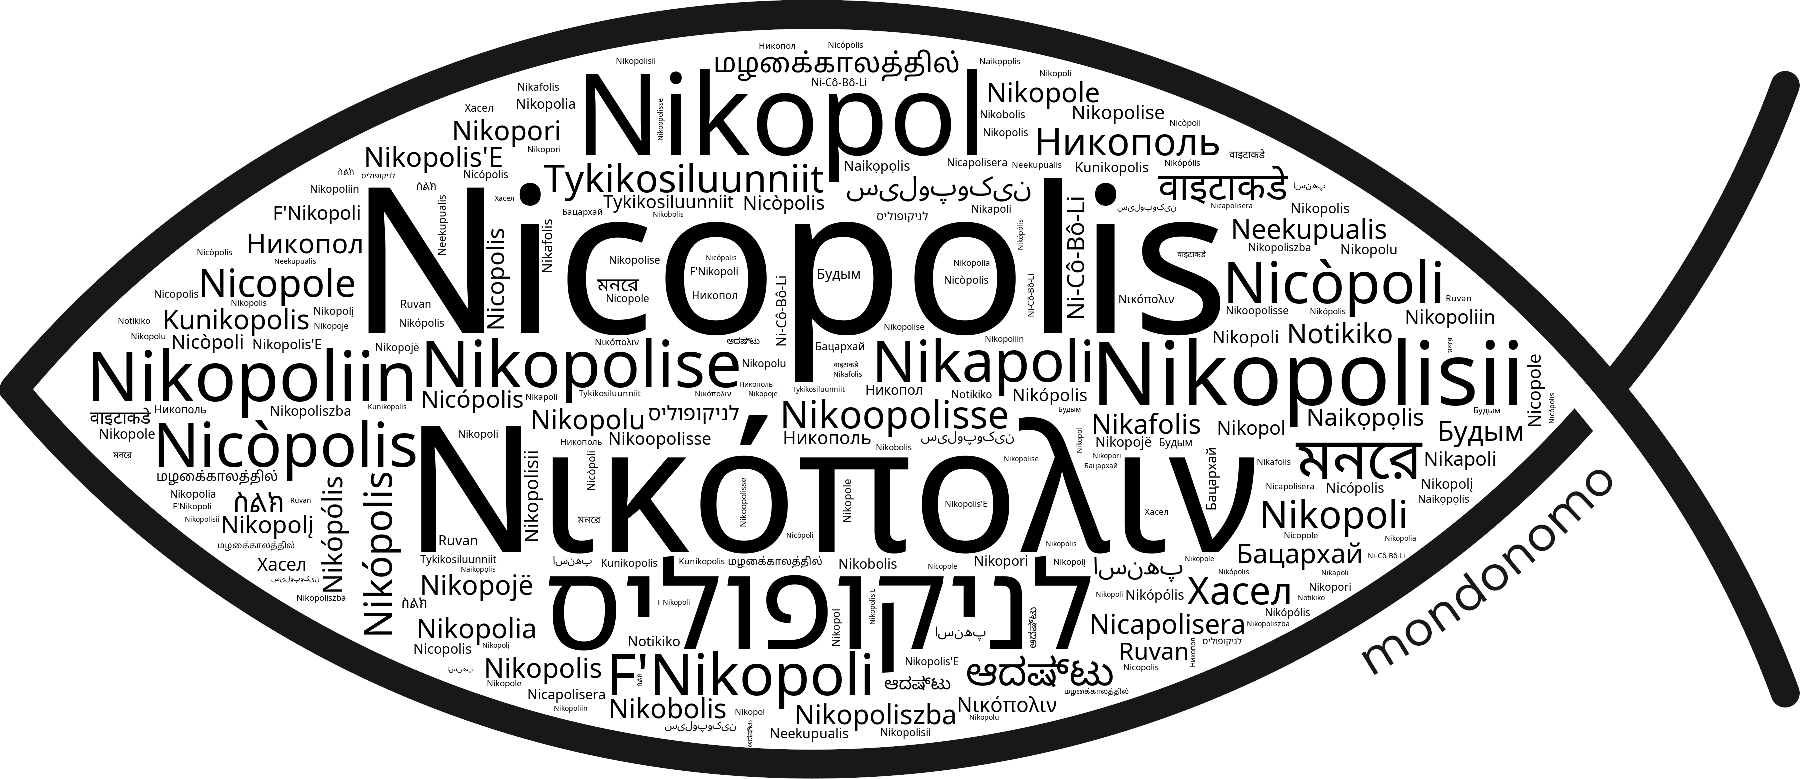 Name Nicopolis in the world's Bibles